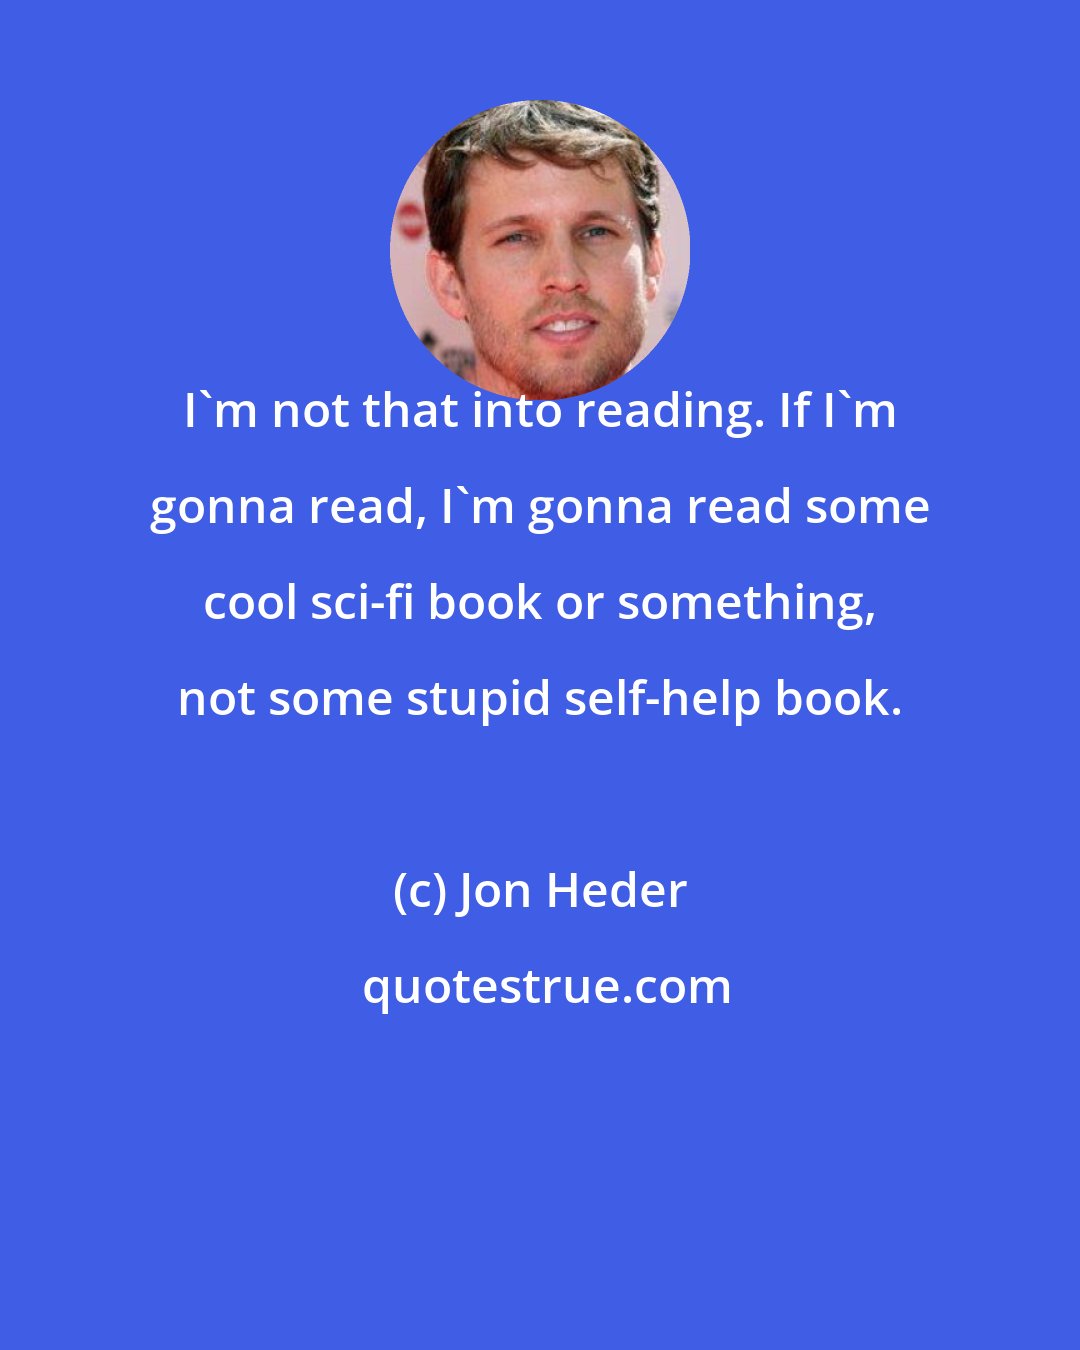 Jon Heder: I'm not that into reading. If I'm gonna read, I'm gonna read some cool sci-fi book or something, not some stupid self-help book.